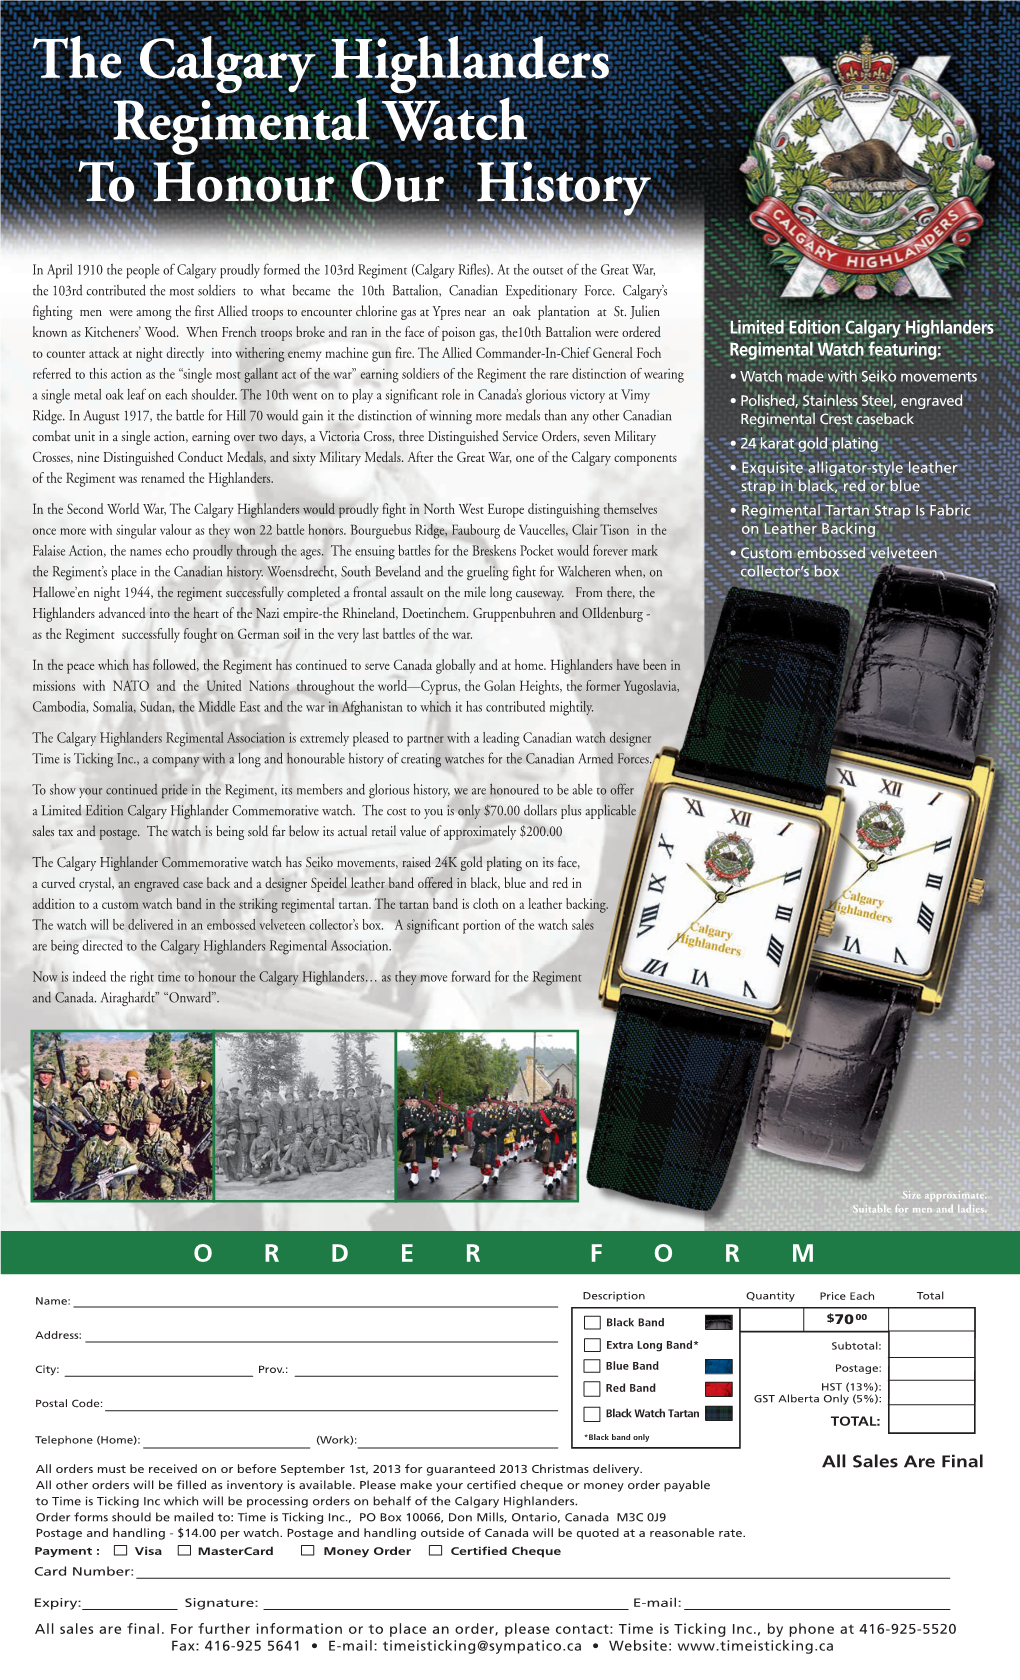 The Calgary Highlanders Regimental Watch to Honour Our History